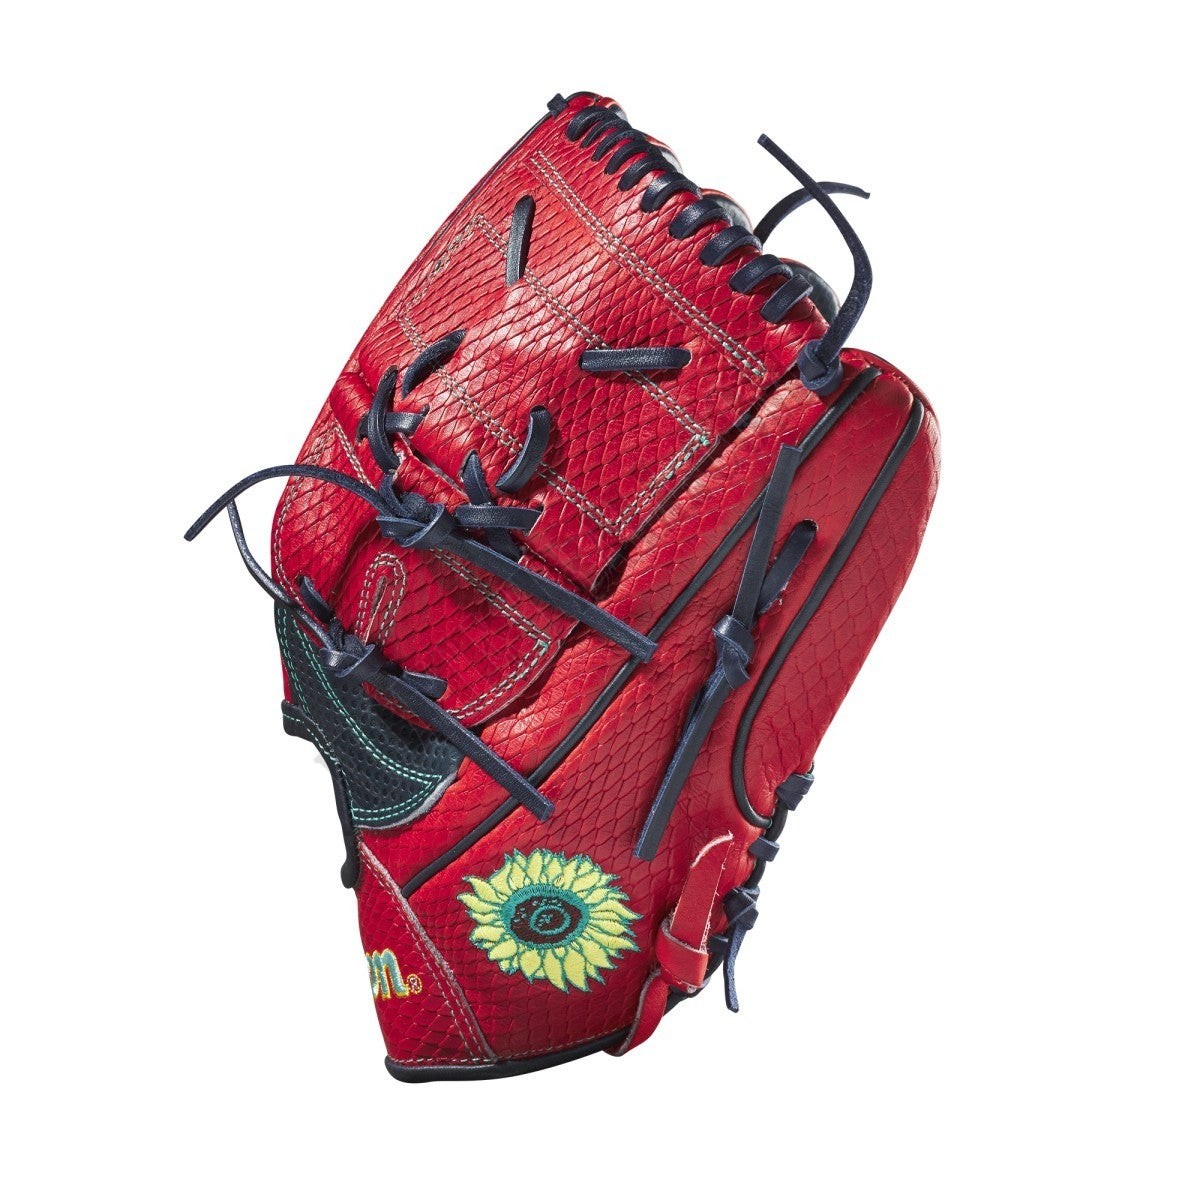 2021 A2000 B2 12" Mike Clevinger Game Model Pitcher's Baseball Glove ● Wilson Promotions - -3